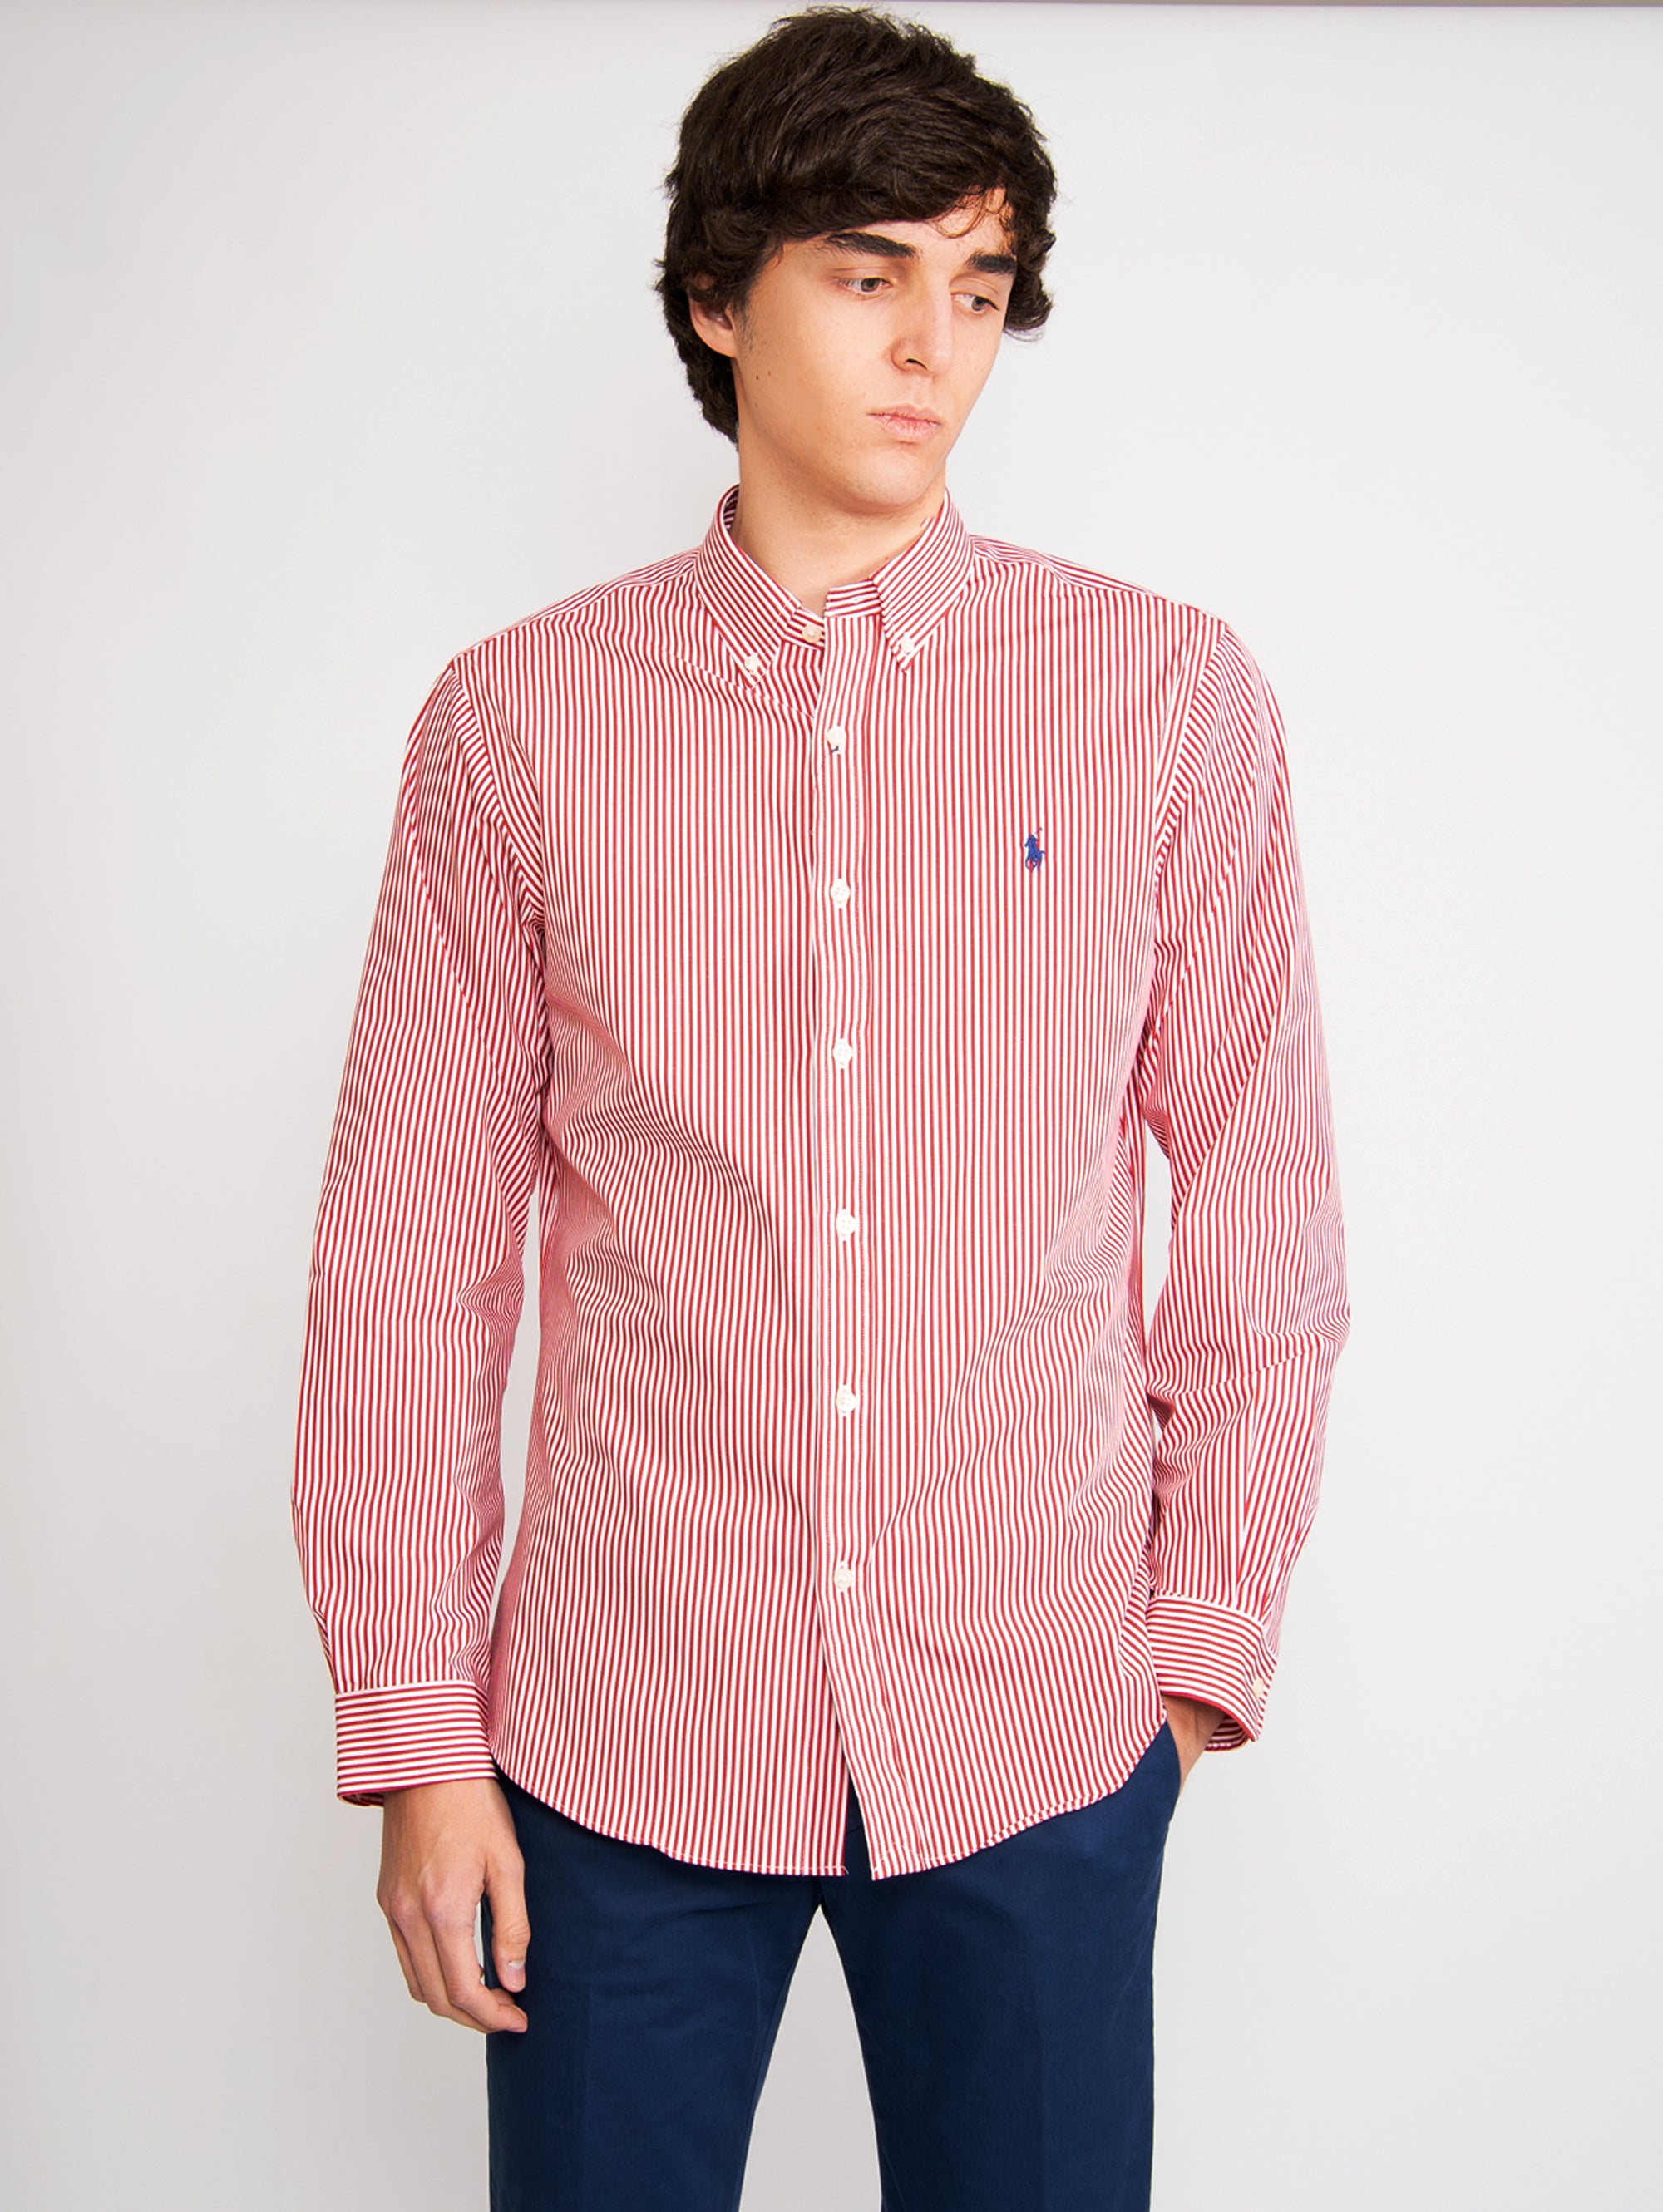 RALPH LAUREN-Camicia a Righe Rosso/Bianco-TRYME Shop